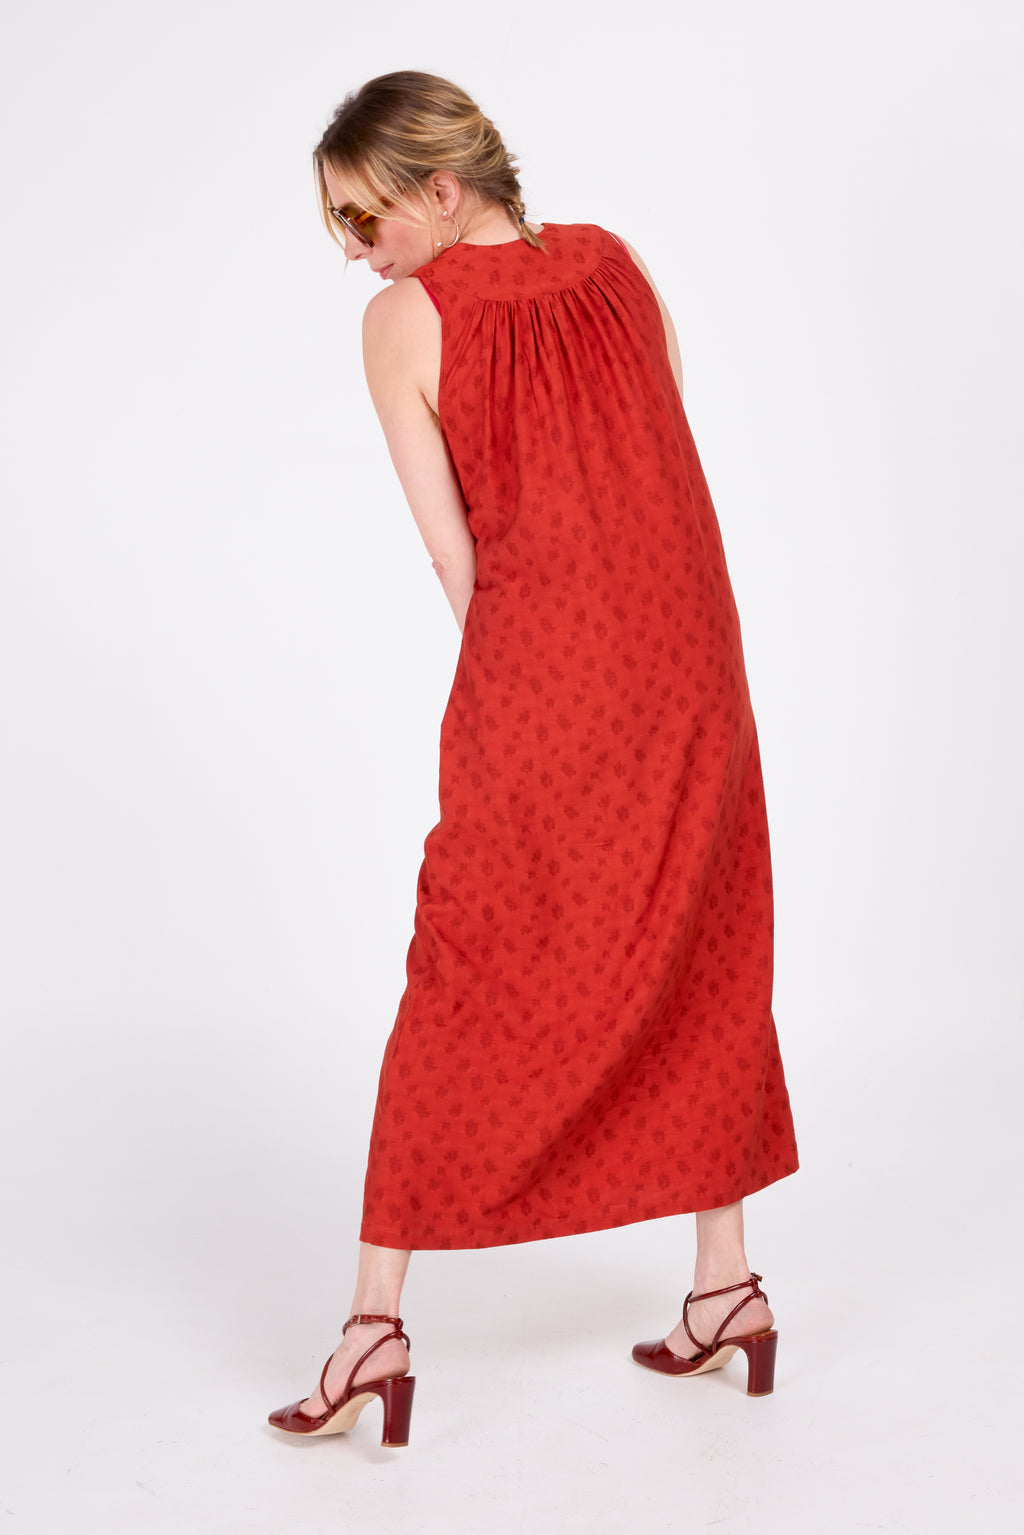 Dina dress in red woven berries